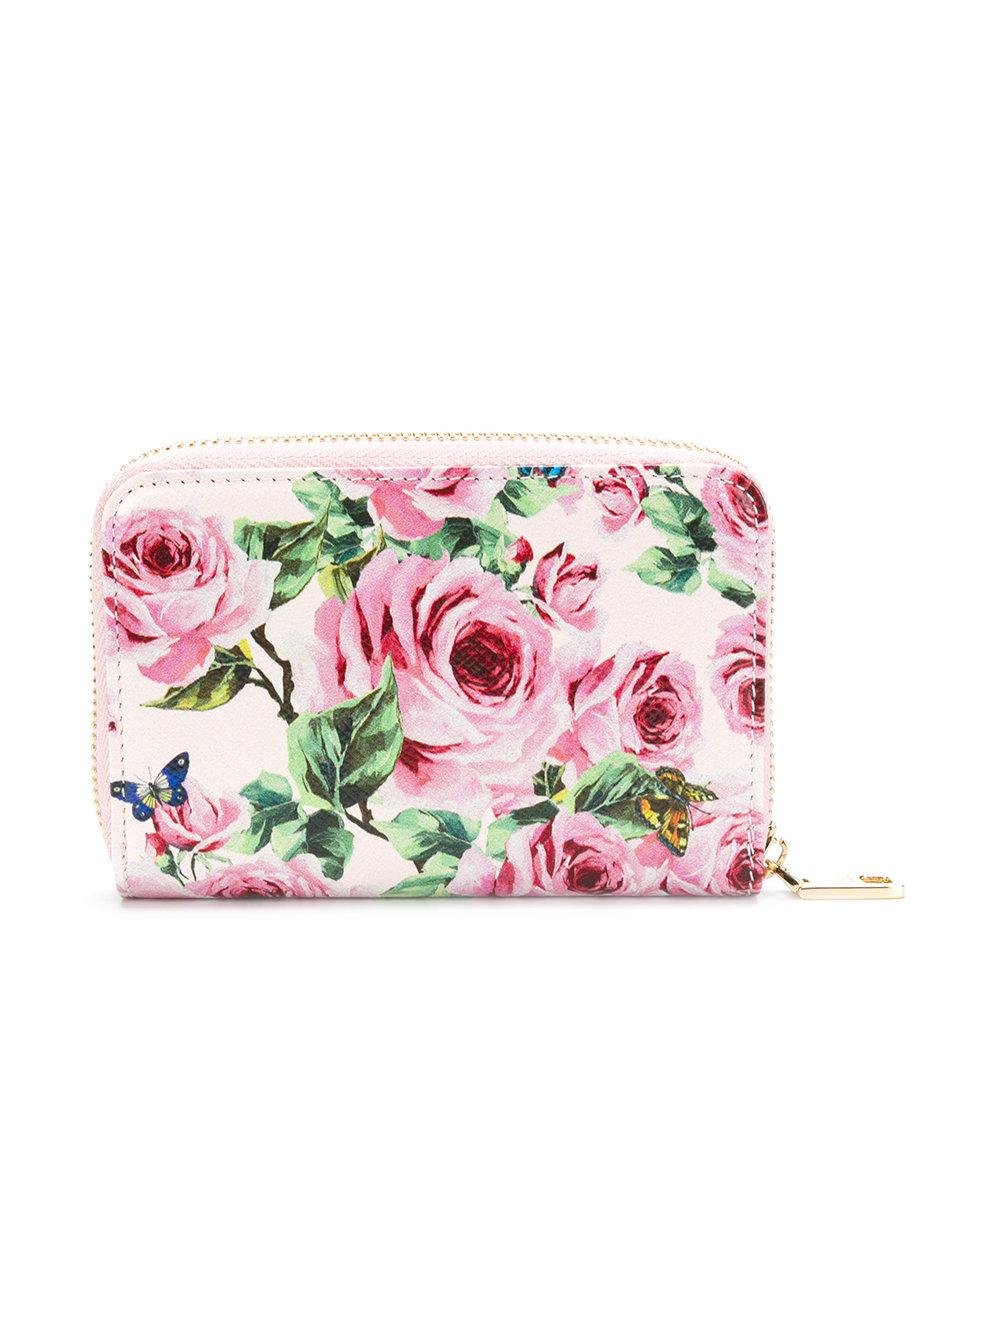 Dolce & Gabbana Leather Floral Print Wallet in Pink & Purple (Pink 